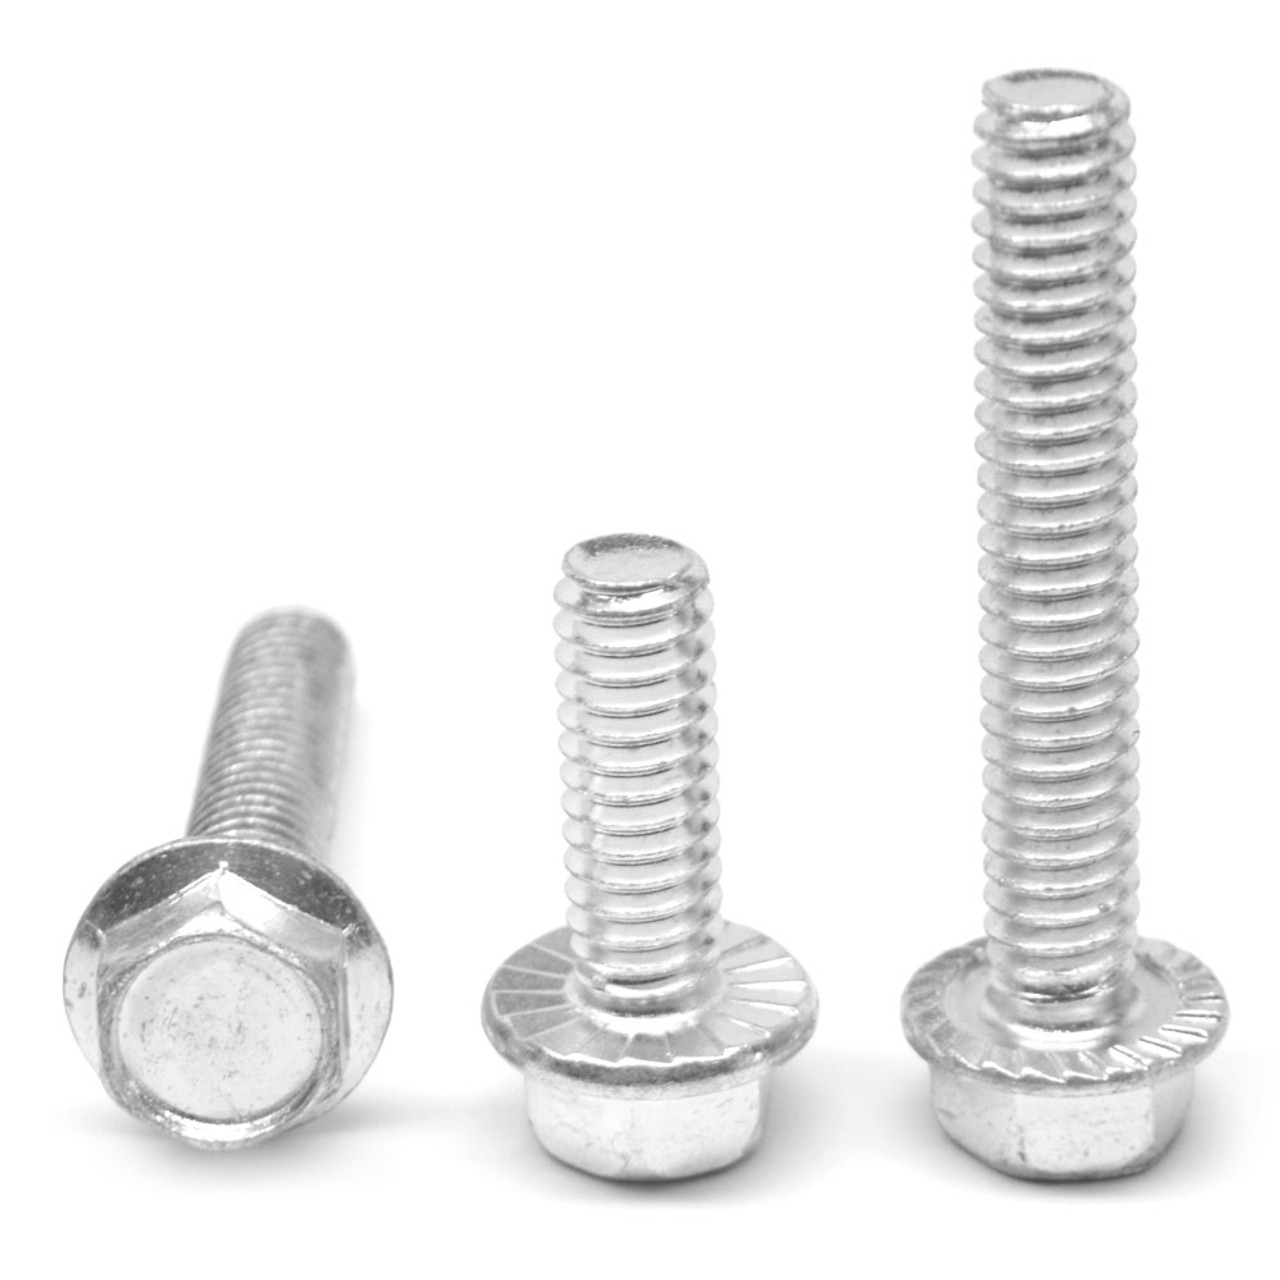 #6-32 x 2" (FT) Coarse Thread Hex Flange Screw with Serration Case Hardened Low Carbon Steel Zinc Plated